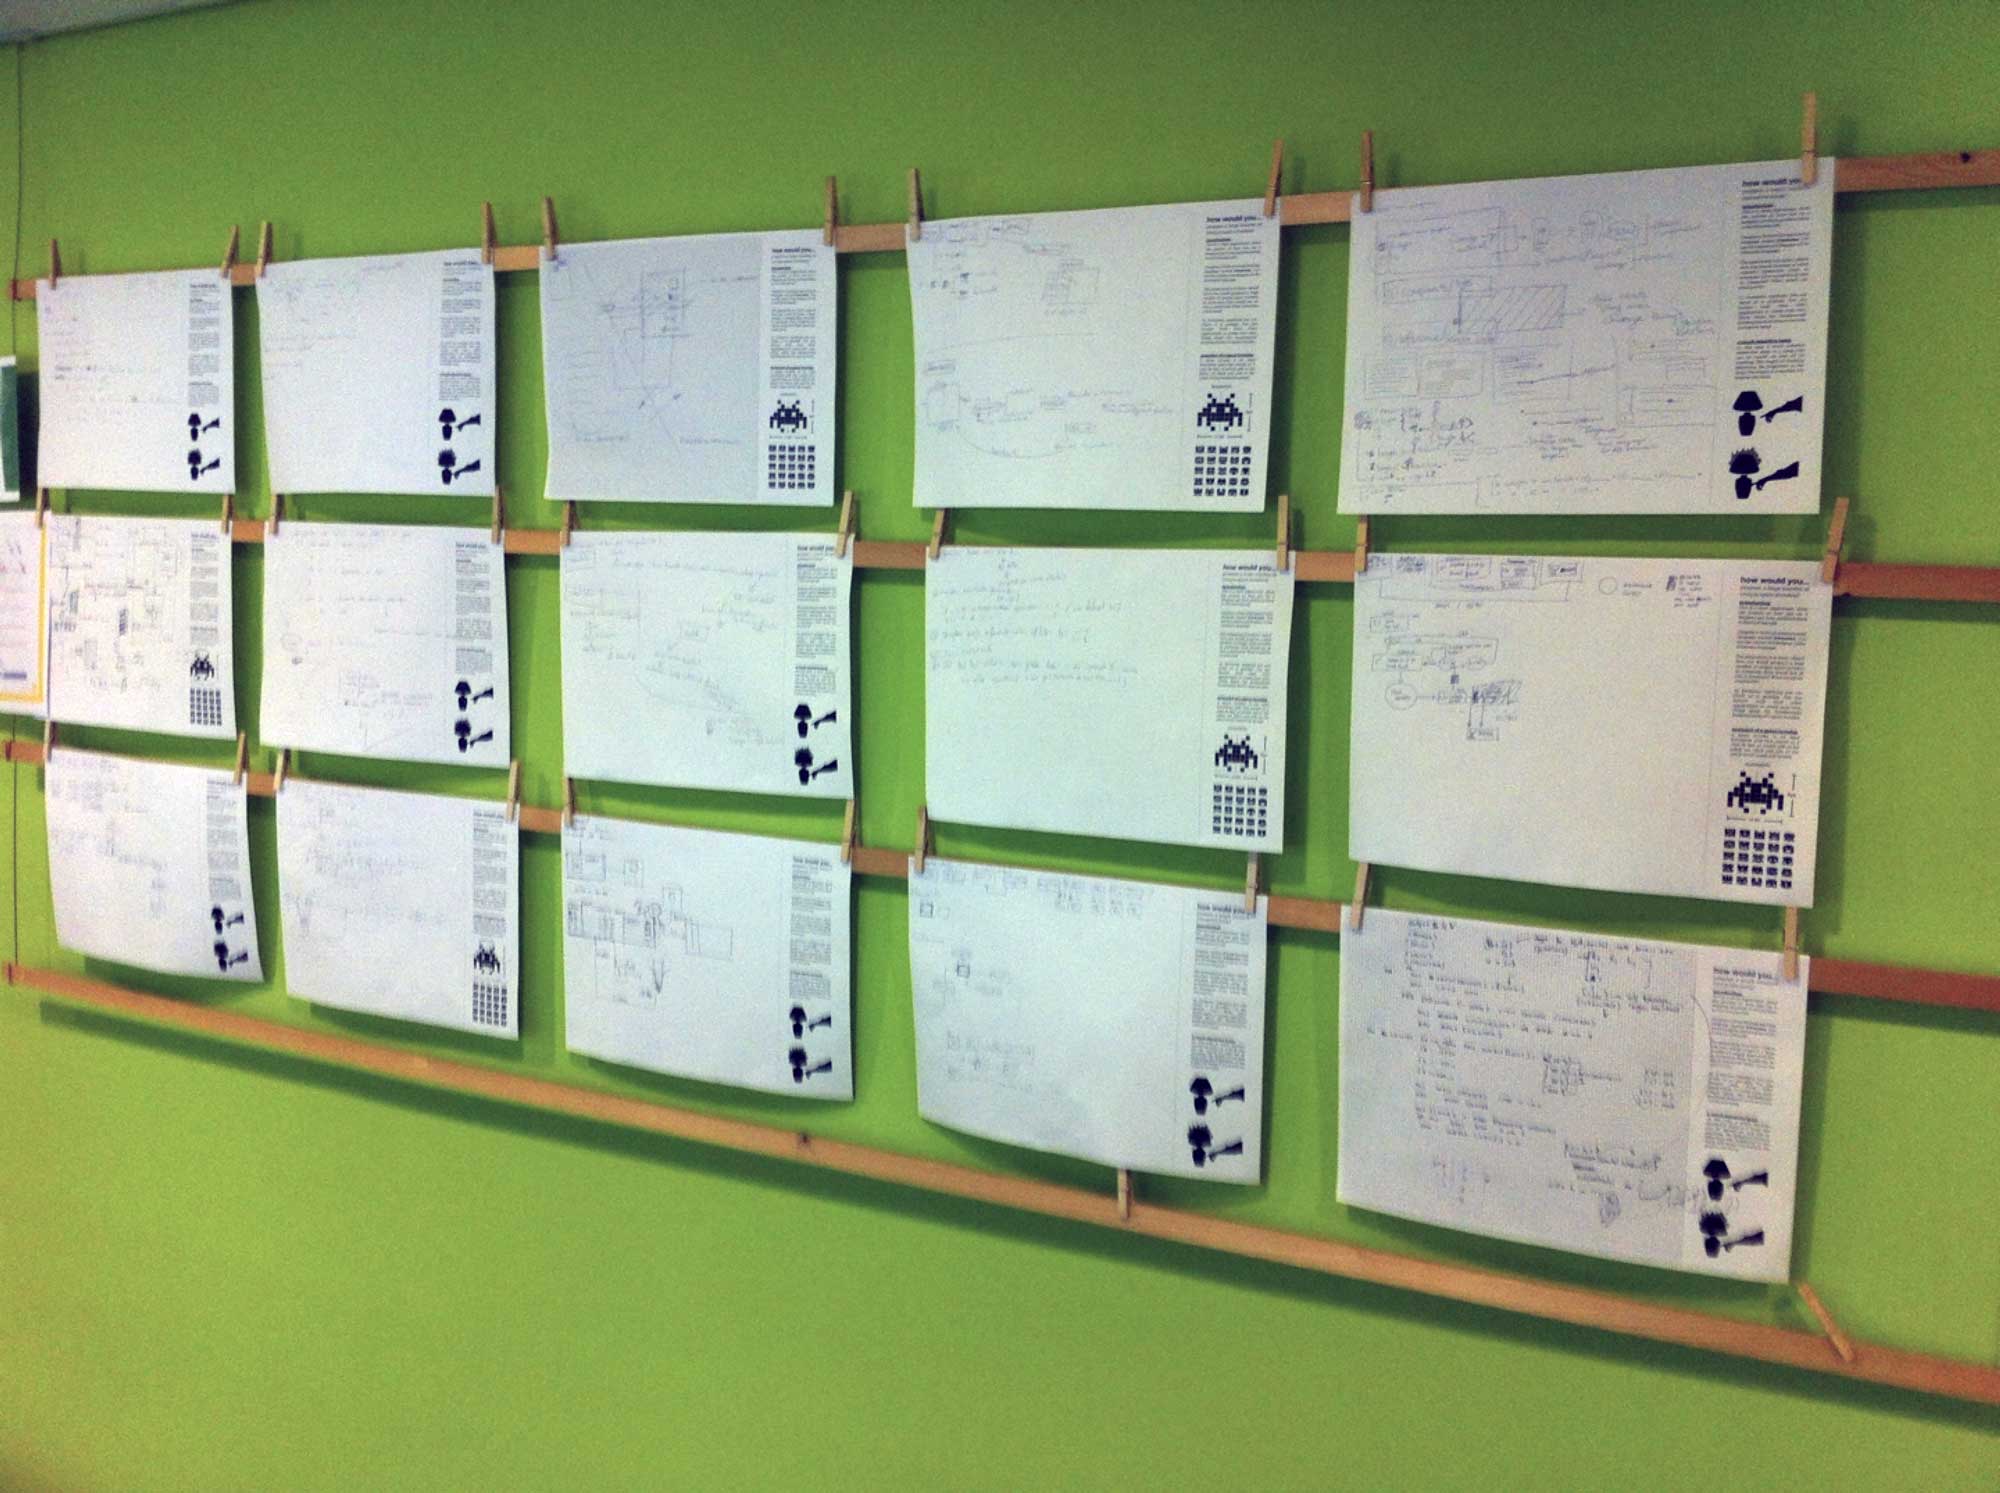 Research results of paper programming, hanged on a wall